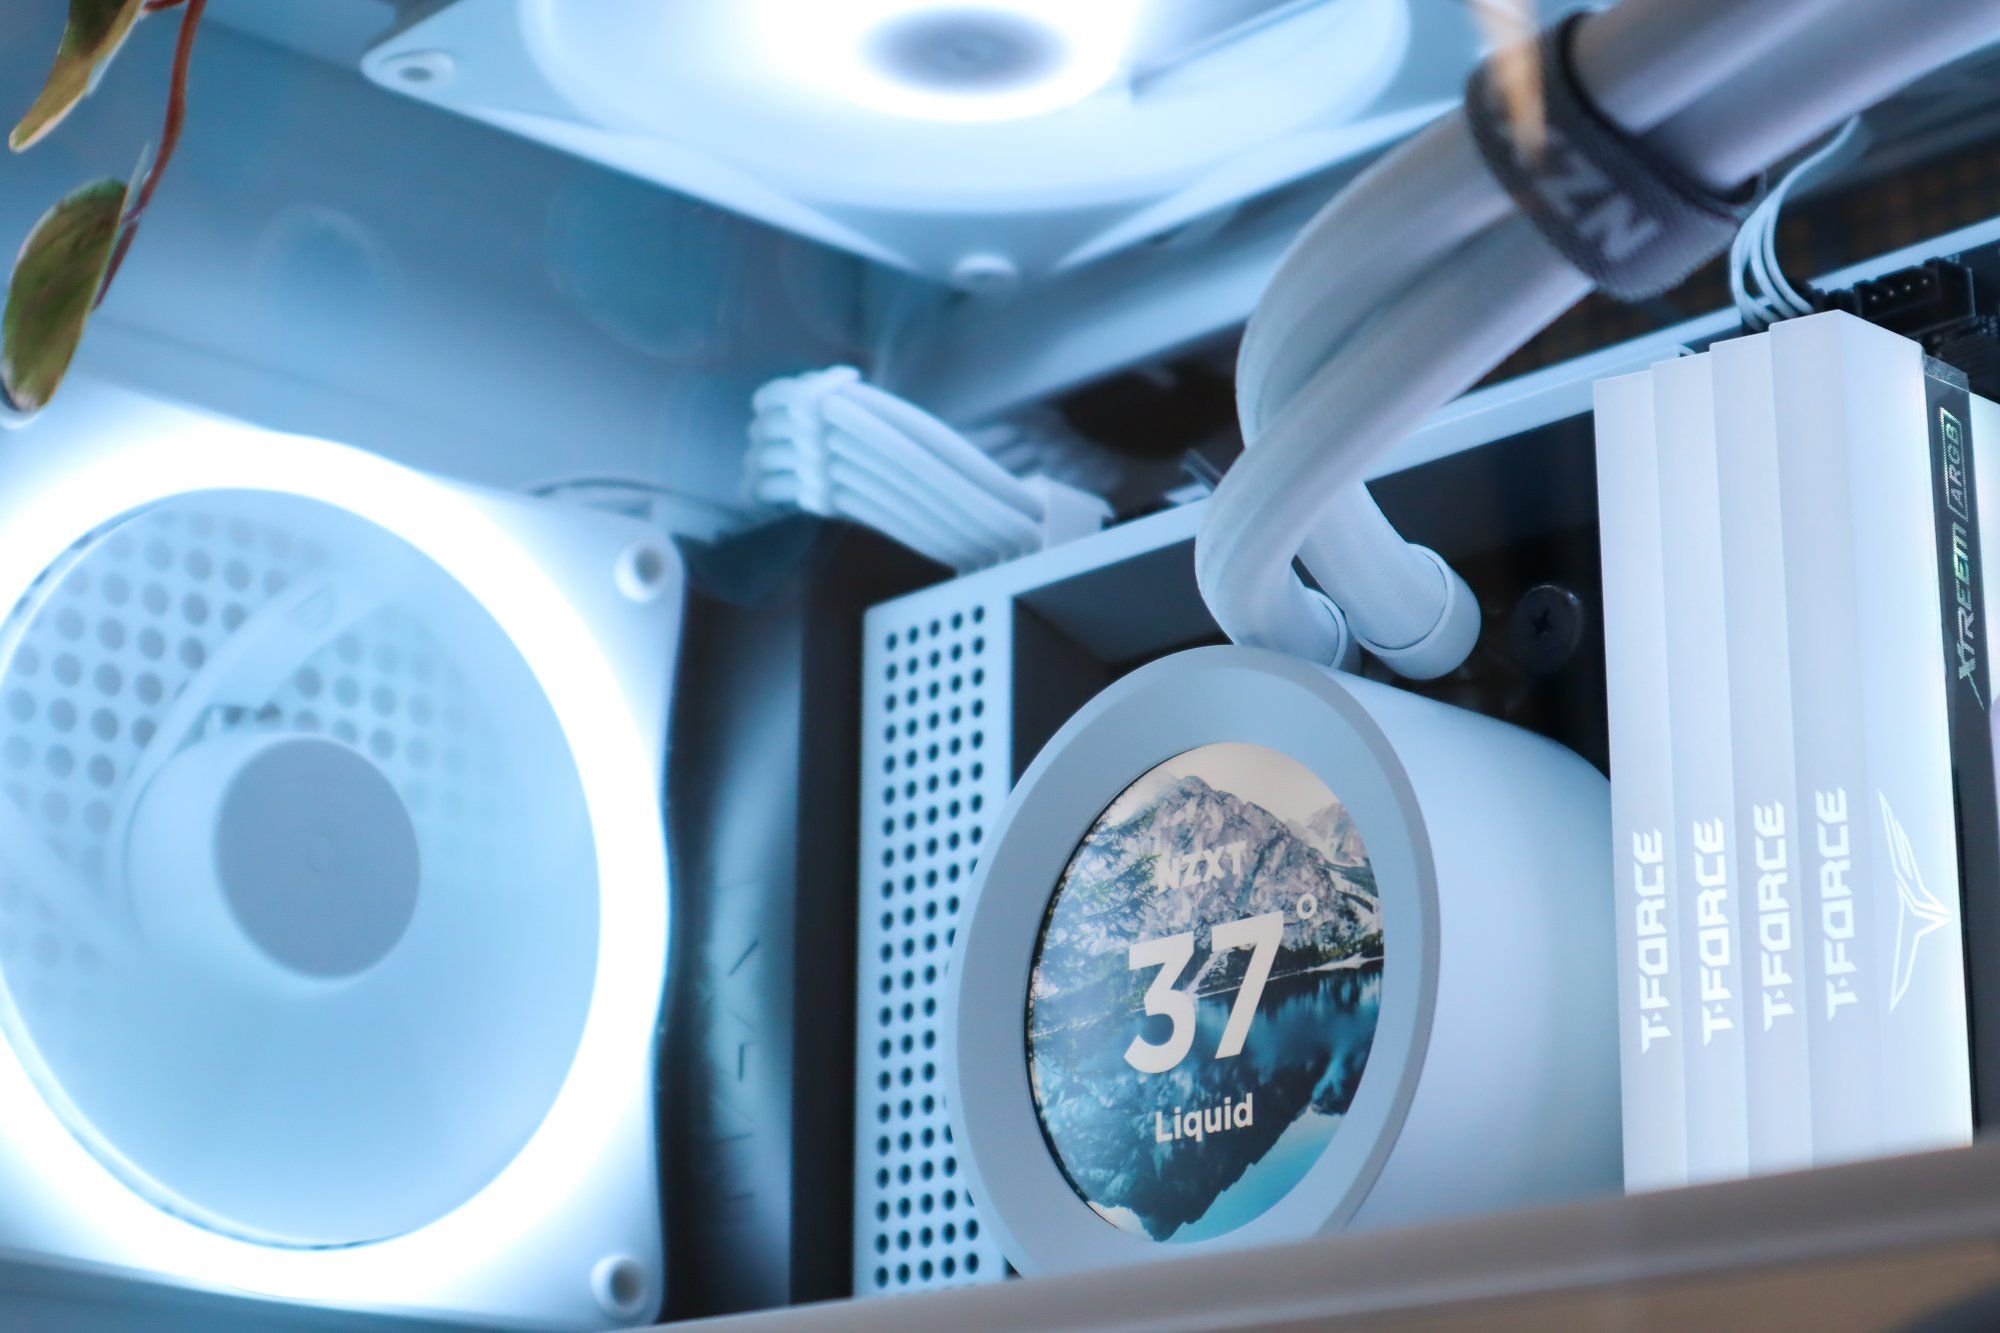 An internal view of a custom PC featuring a white liquid NZXT CPU cooler with a temperature gauge, illuminated by soft LED lighting